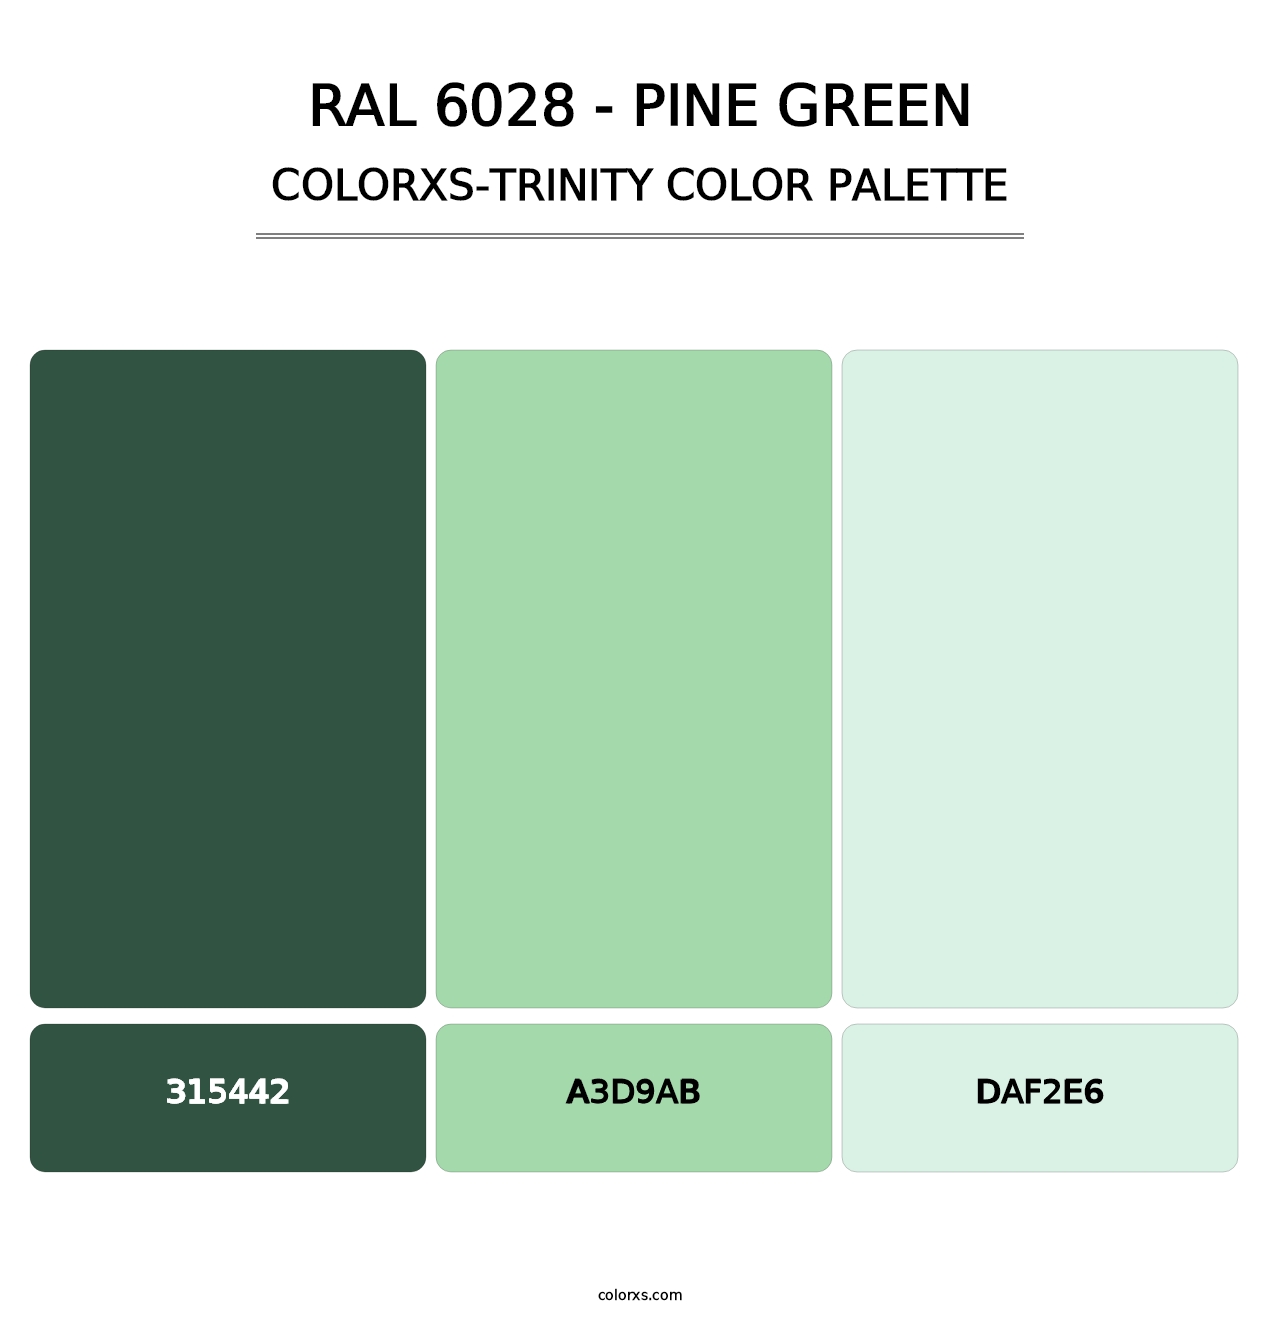 RAL 6028 - Pine Green - Colorxs Trinity Palette